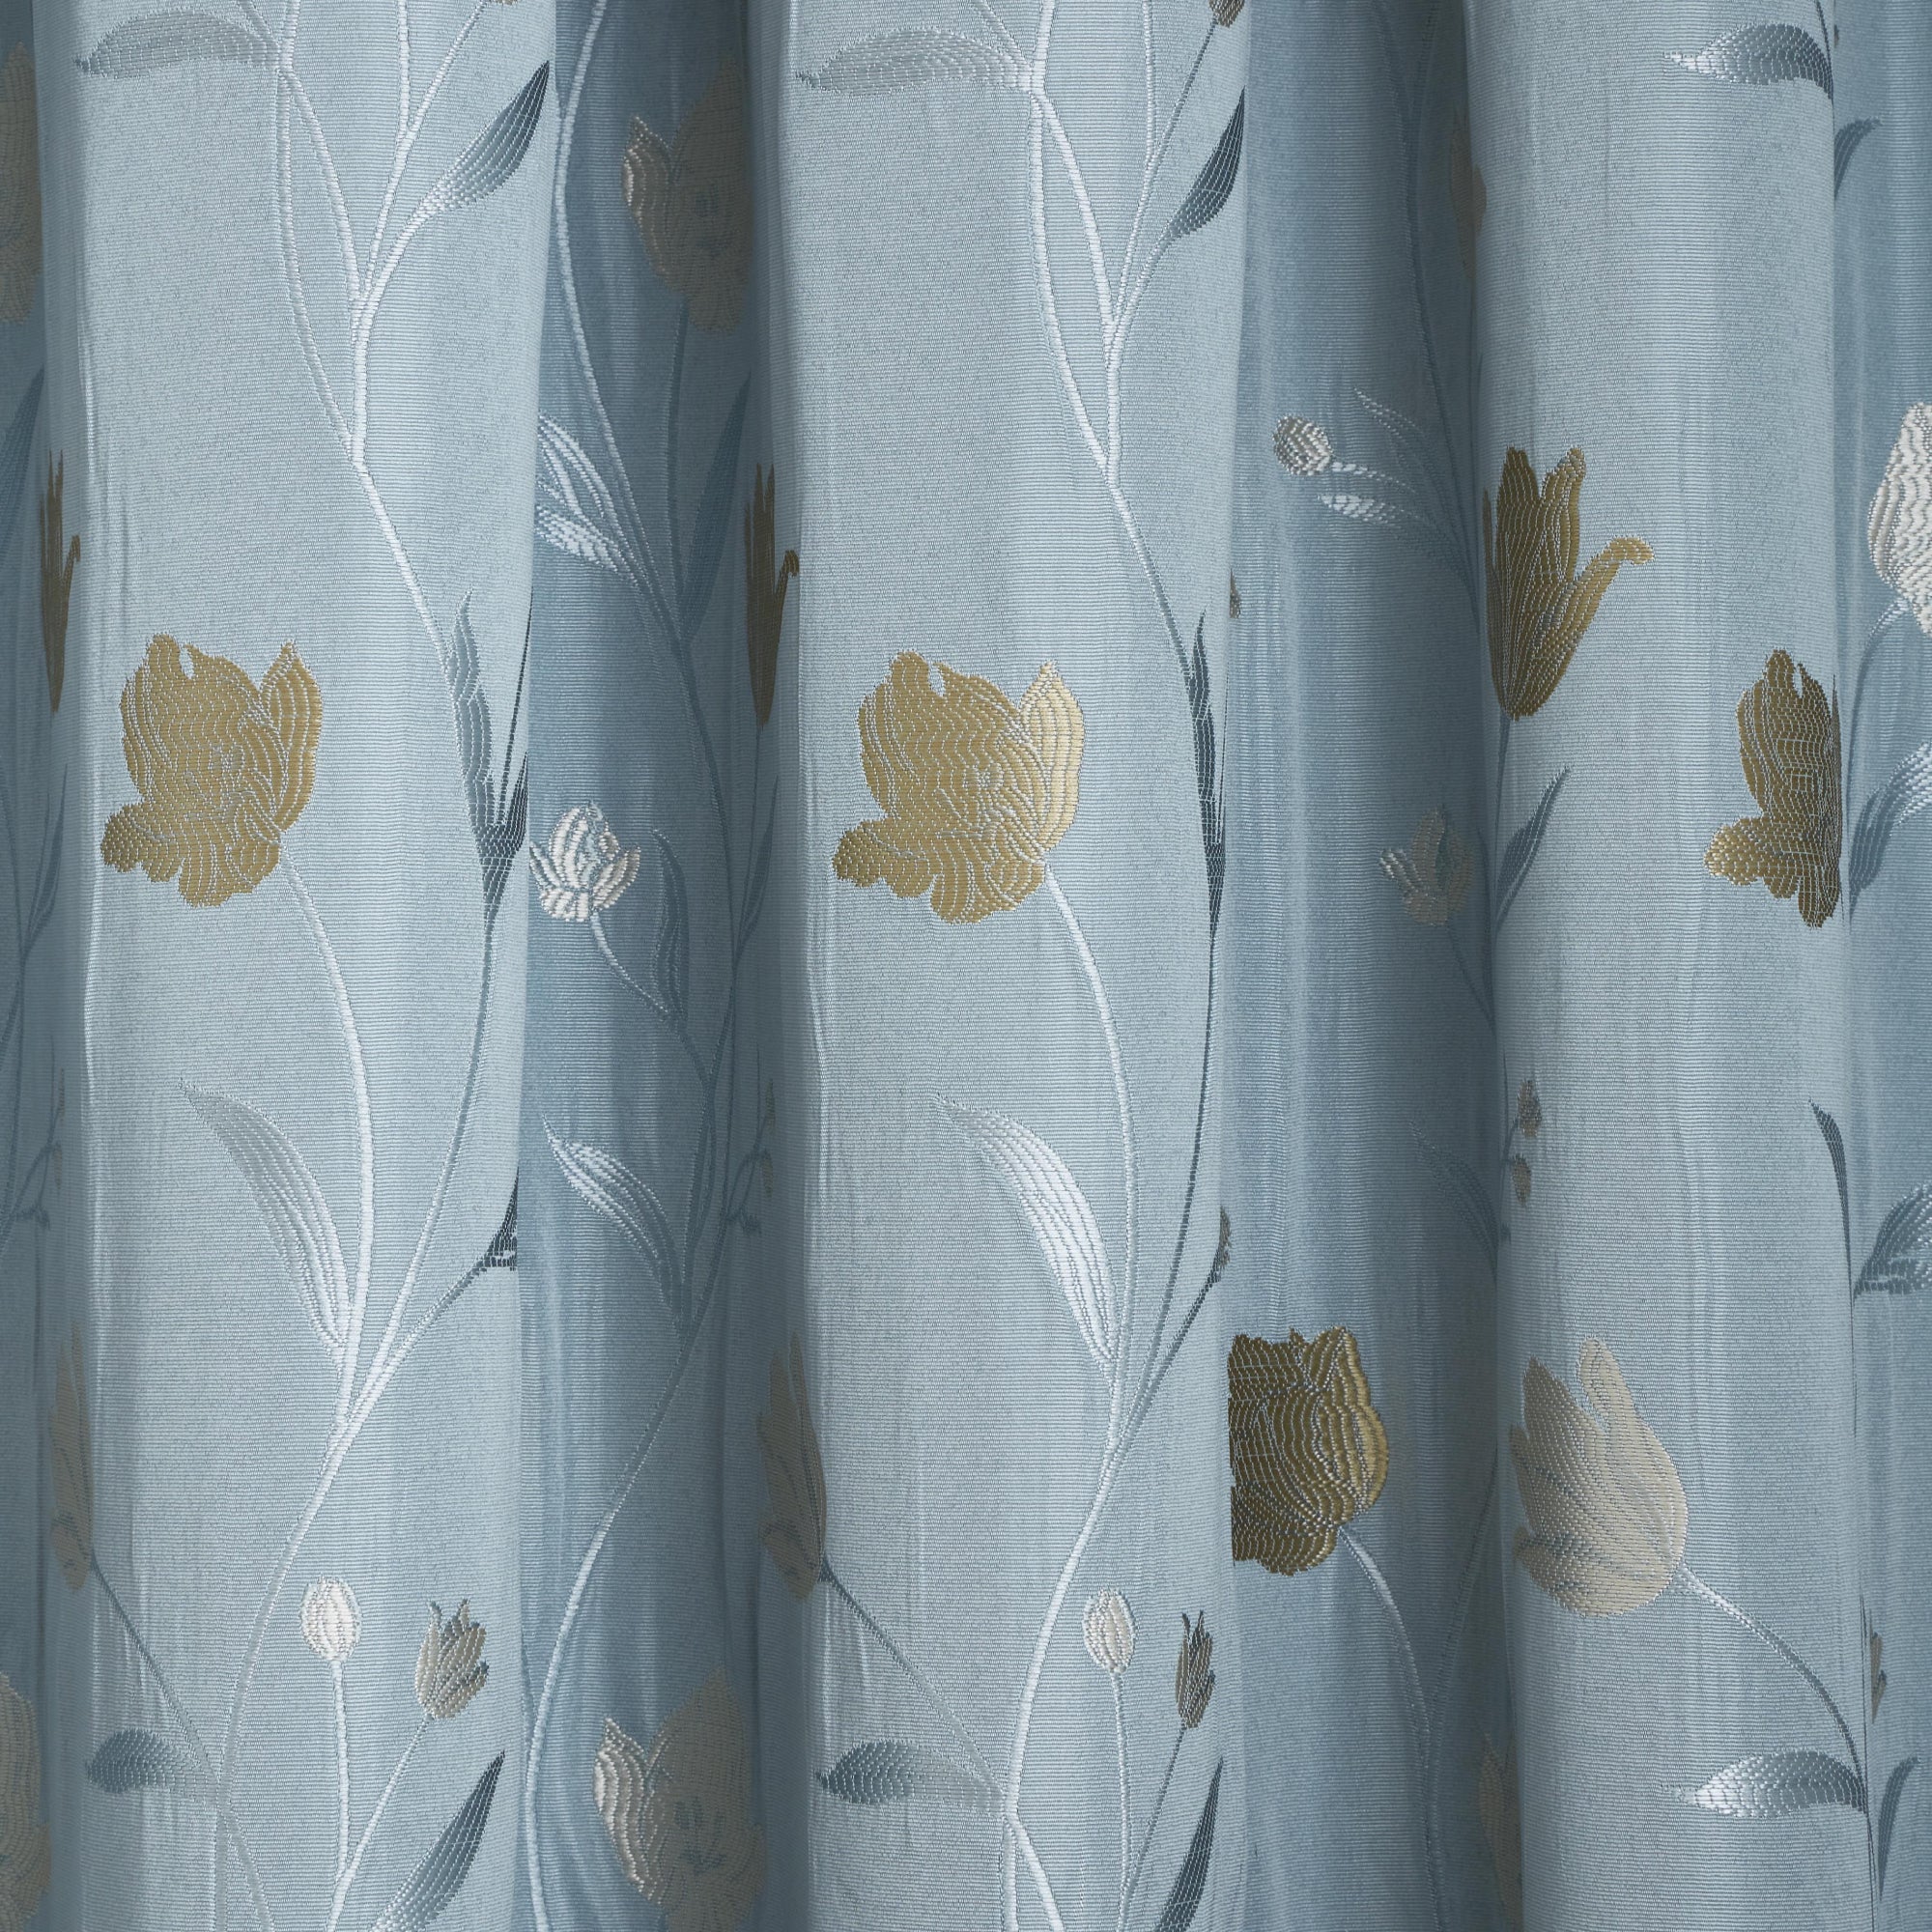 Pair of Pencil Pleat Curtains Juliette by Curtina in Duckegg